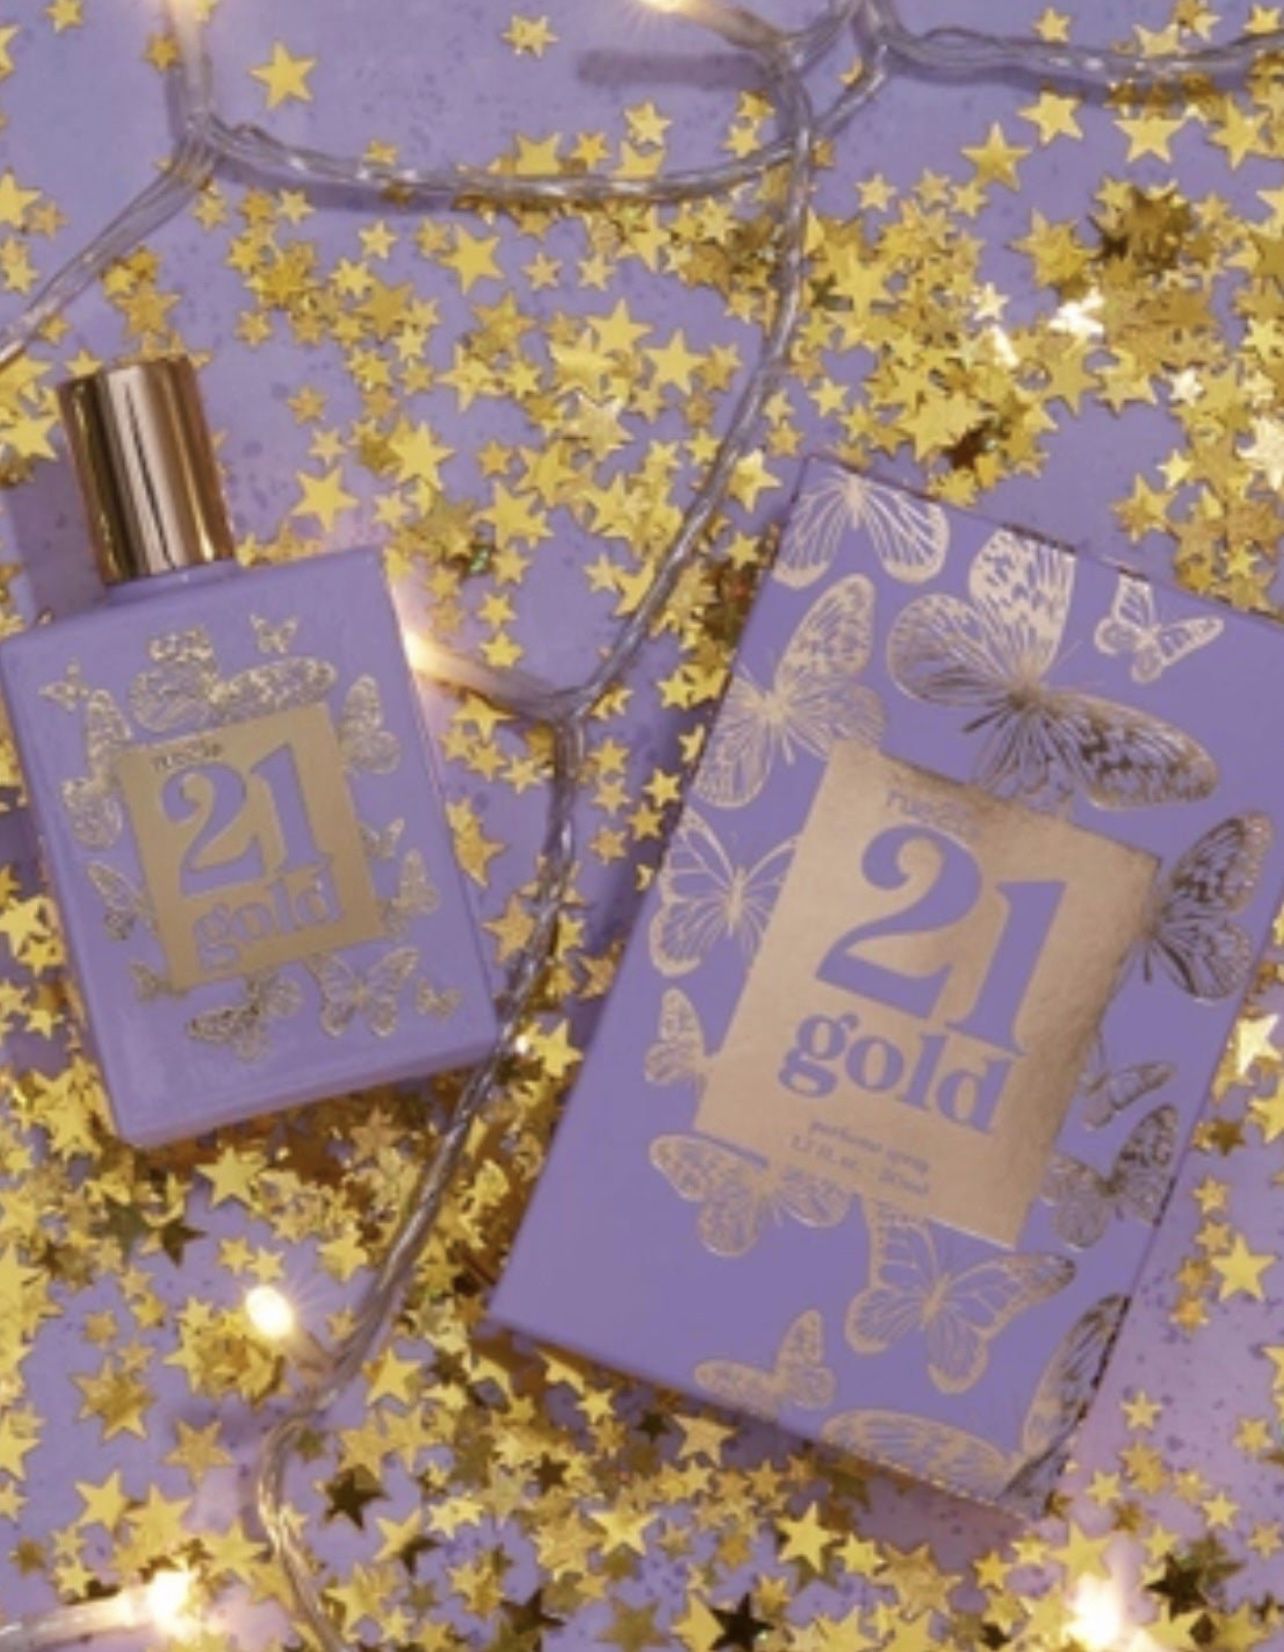 21 Gold Fragrance + Lotion